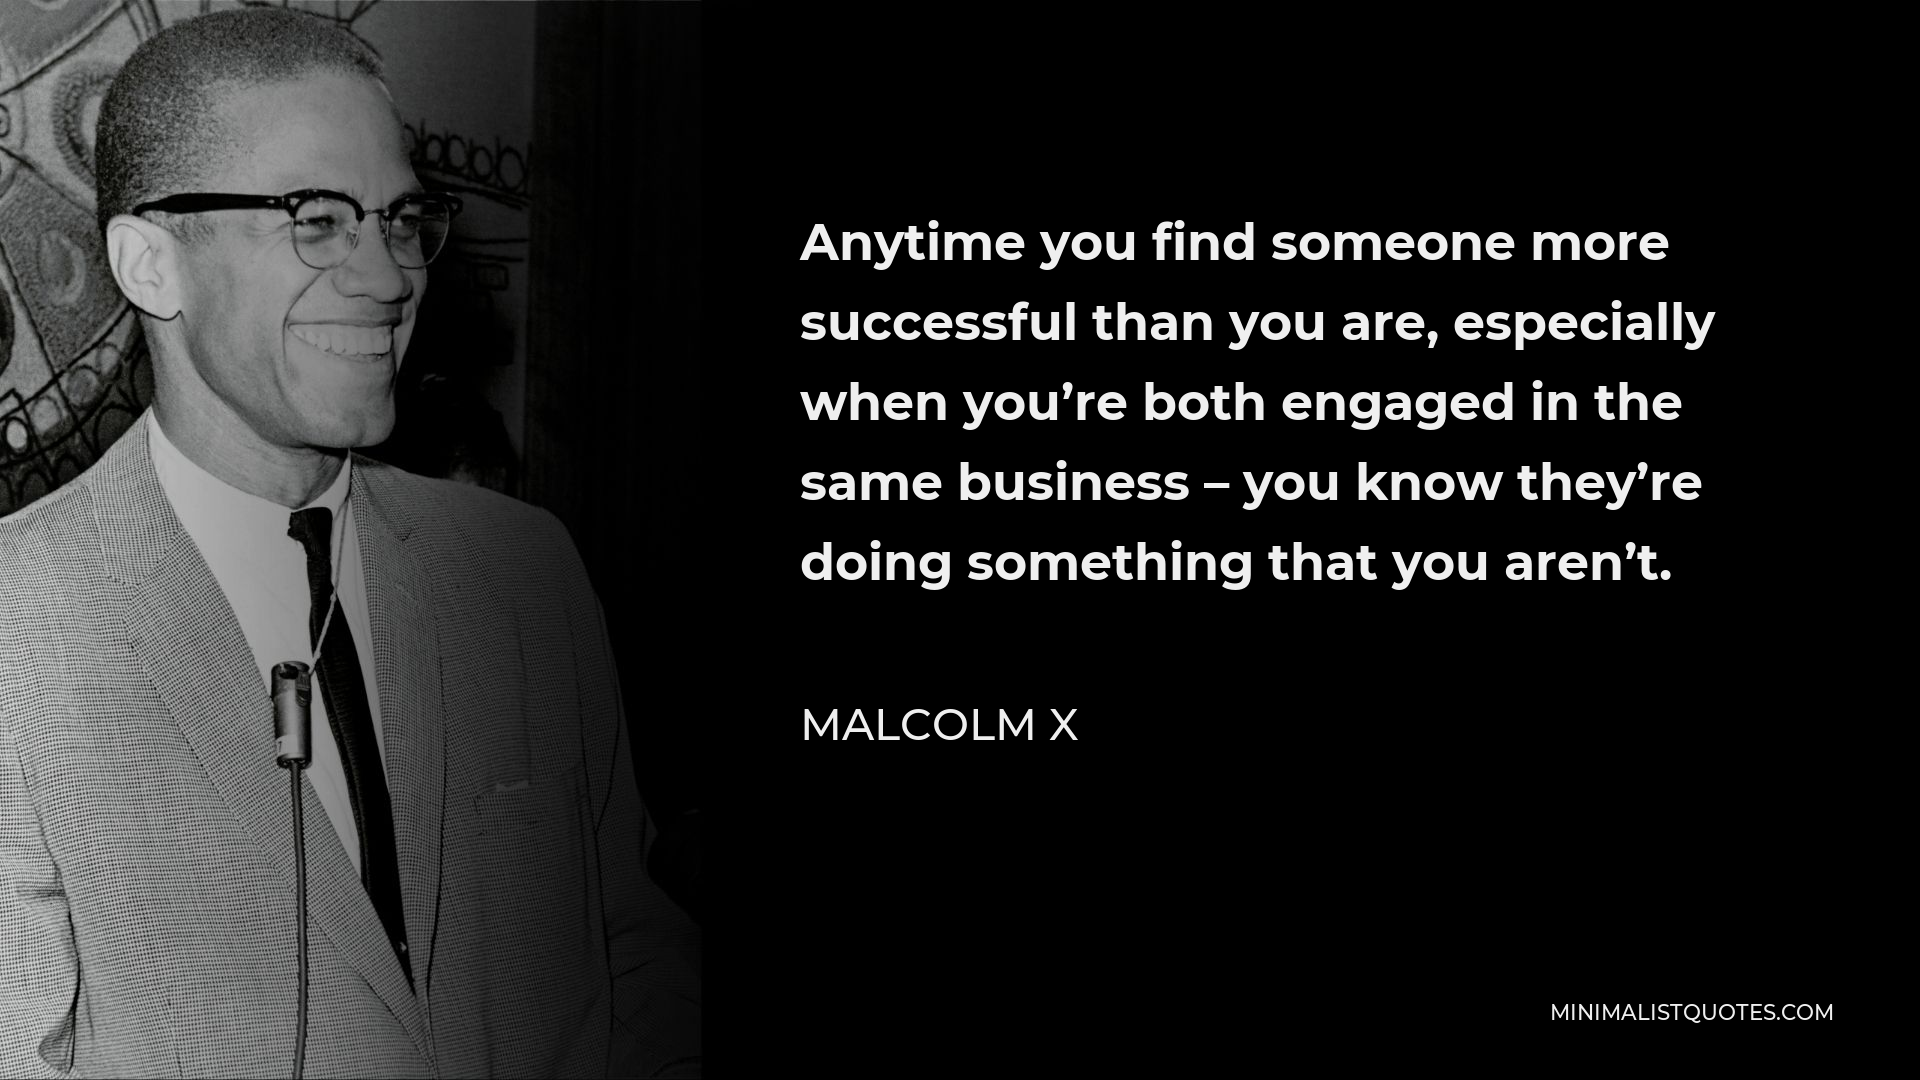 Malcolm X Quote - Anytime you find someone more successful than you are, especially when you’re both engaged in the same business – you know they’re doing something that you aren’t.